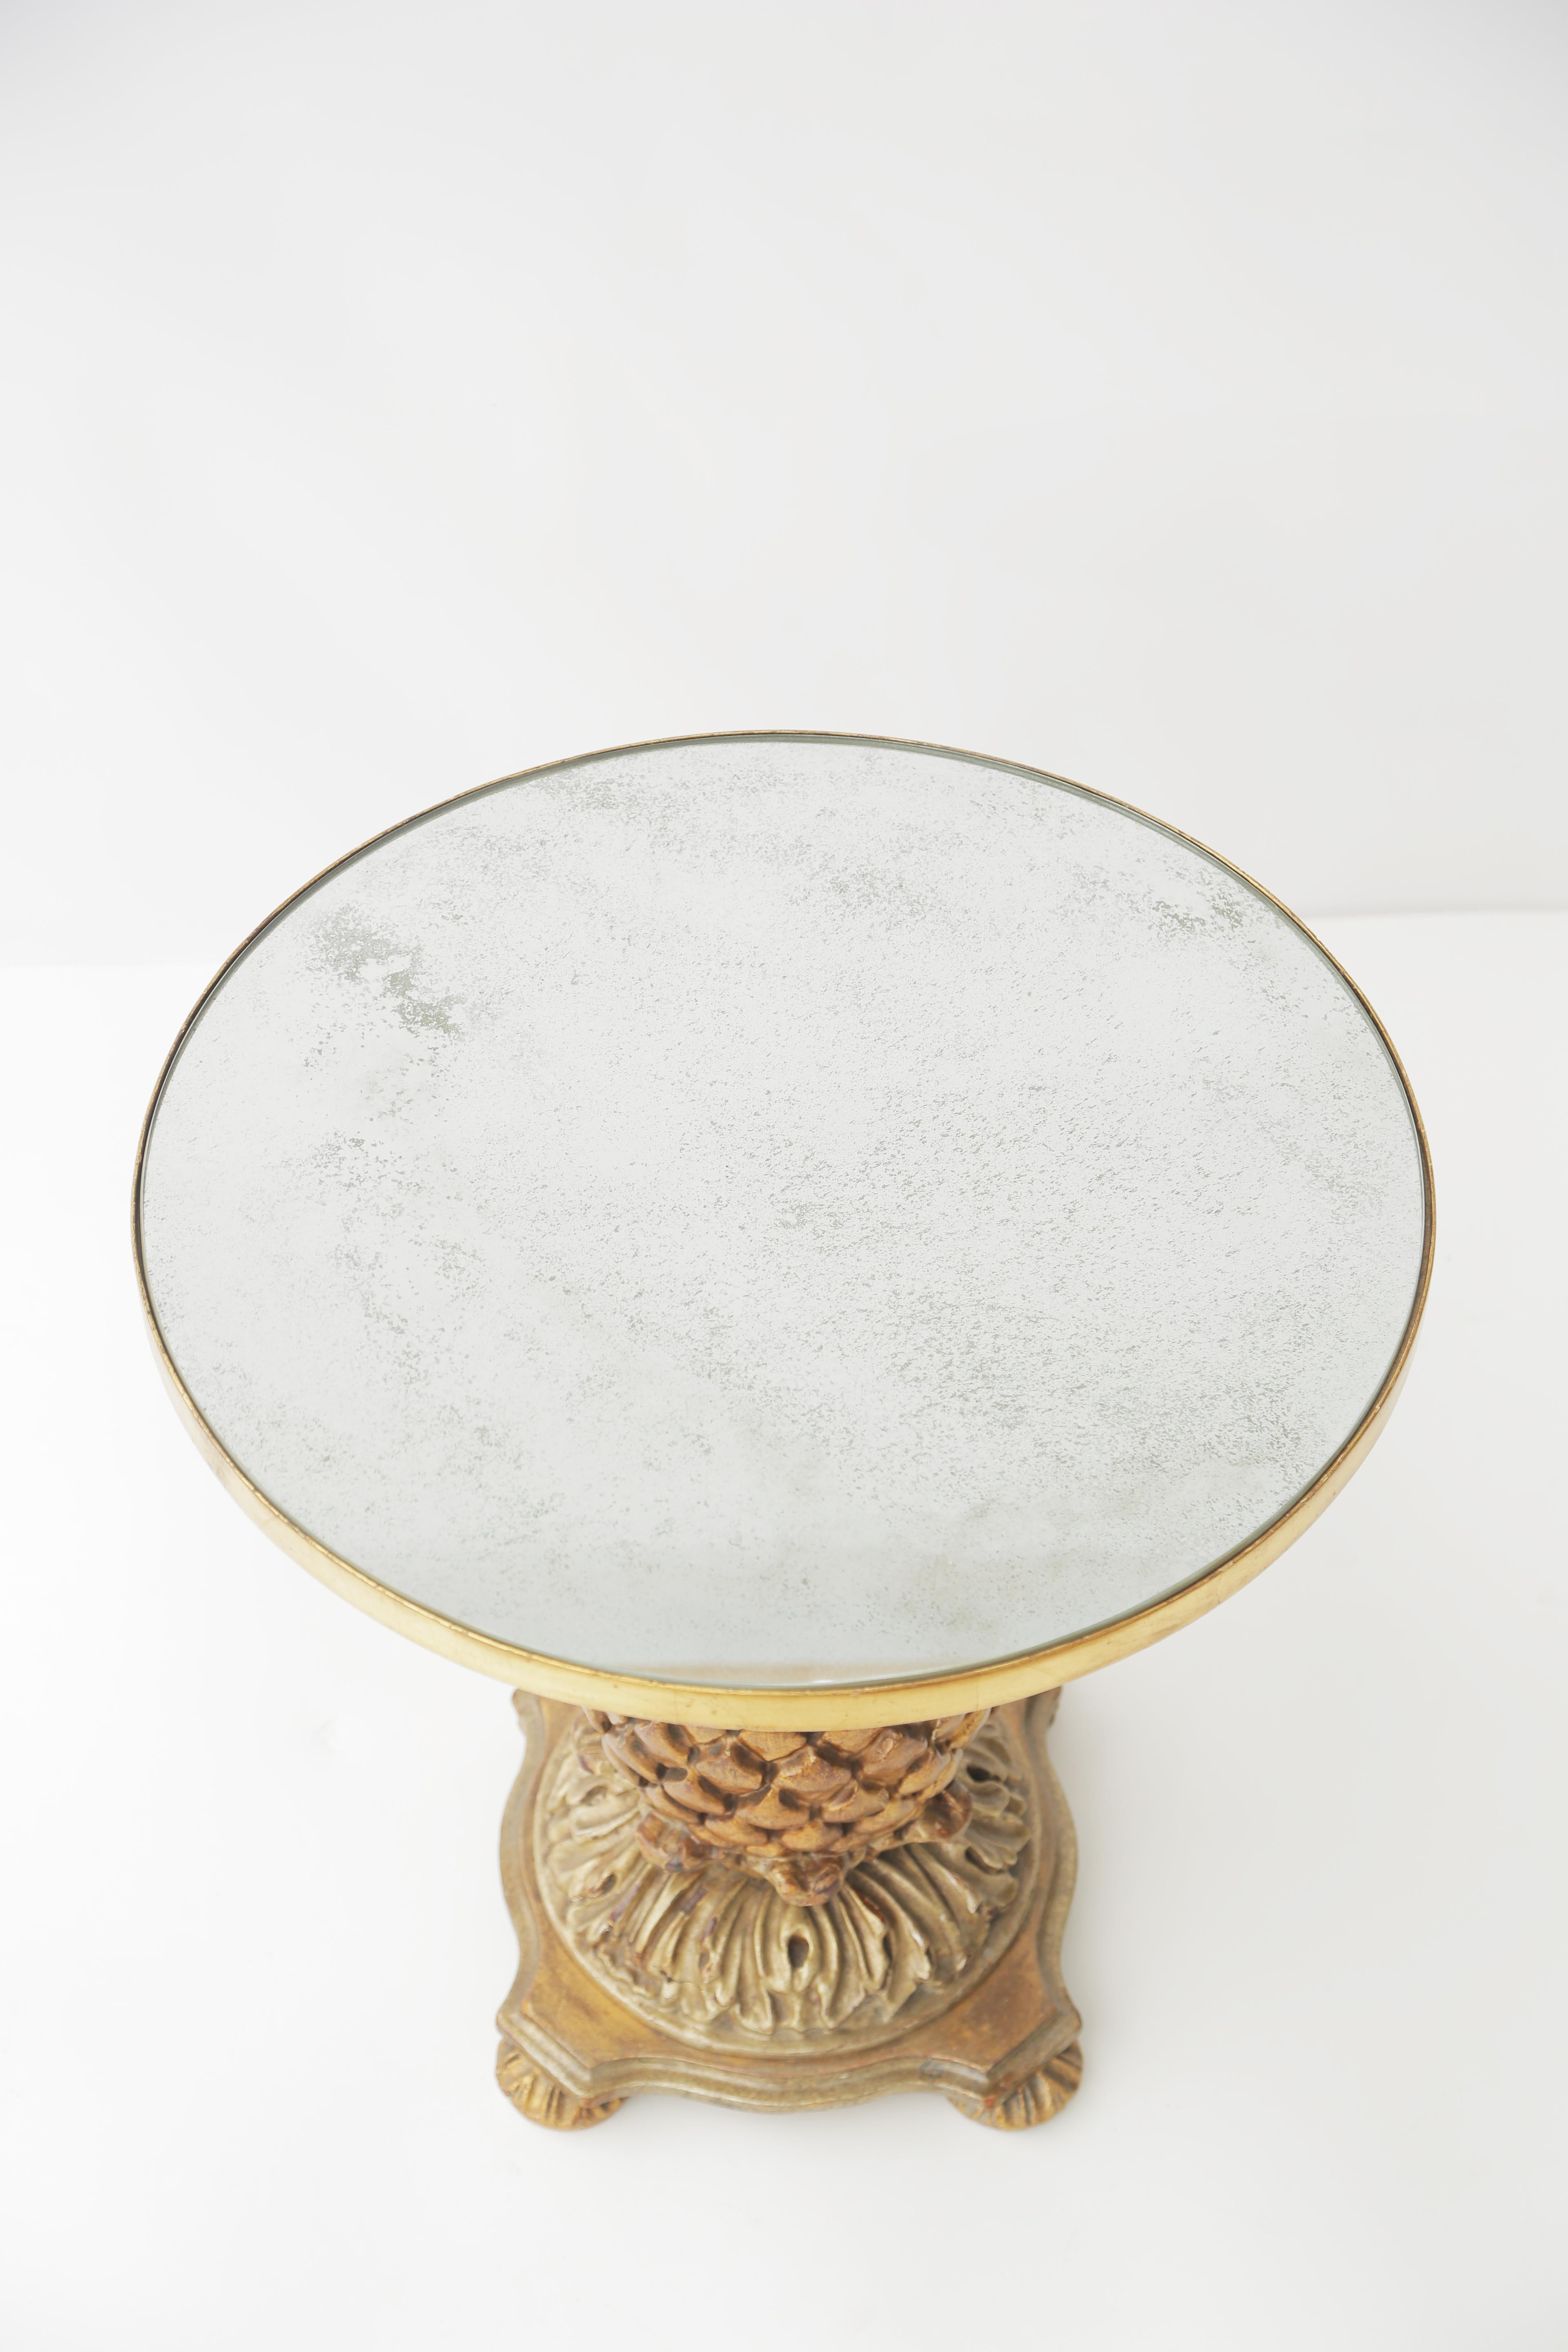 Hollywood Regency Vintage Italin Pineapple Accent Table with Mirrored Top For Sale